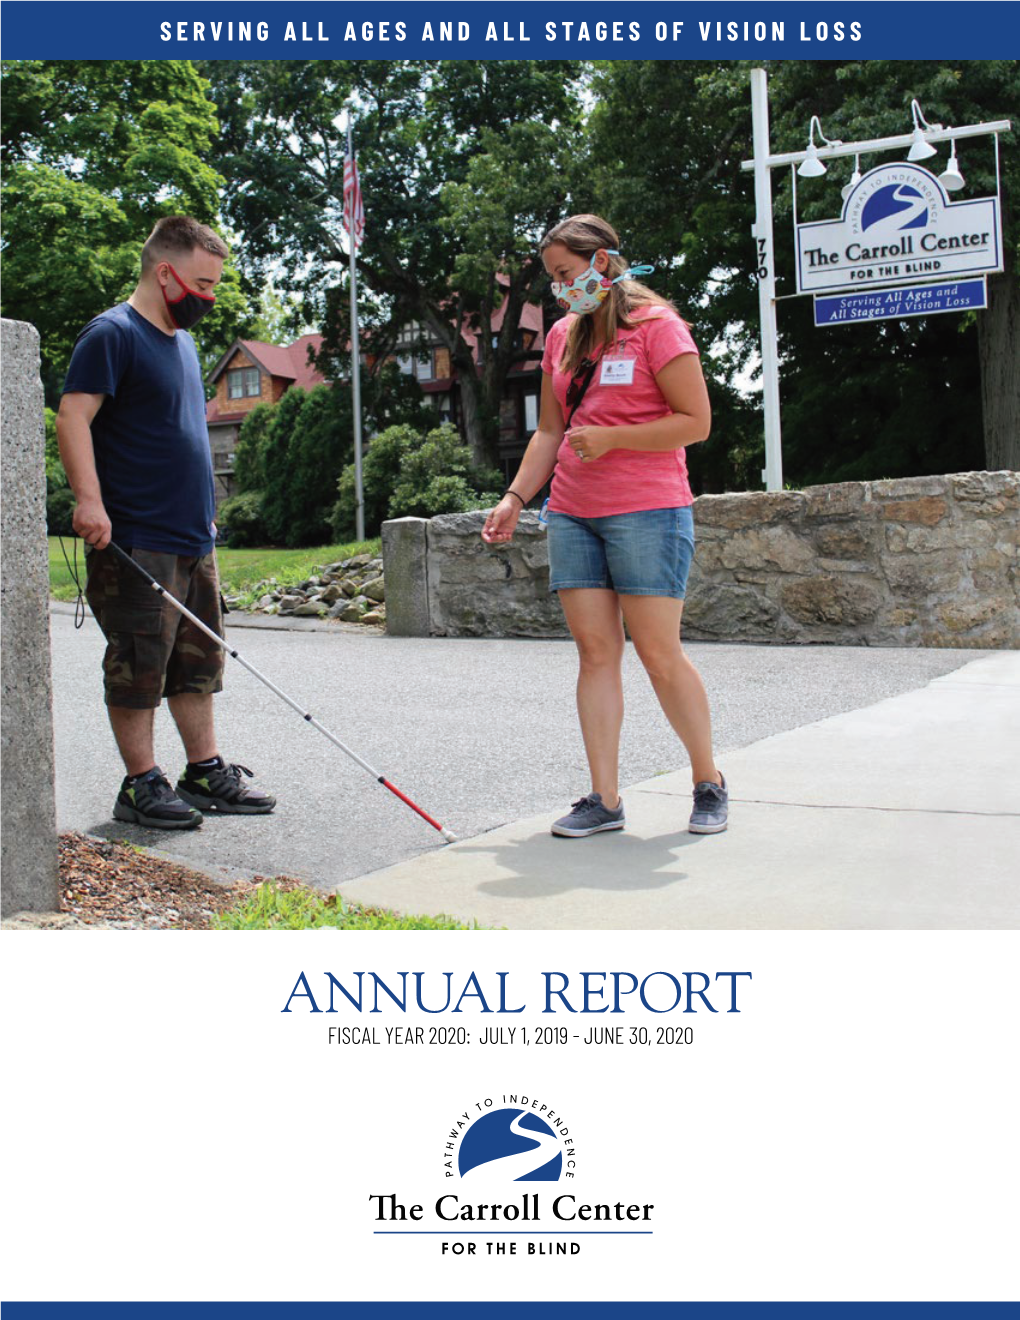 The Carroll Center for the Blind Fiscal Year 2020 Annual Report